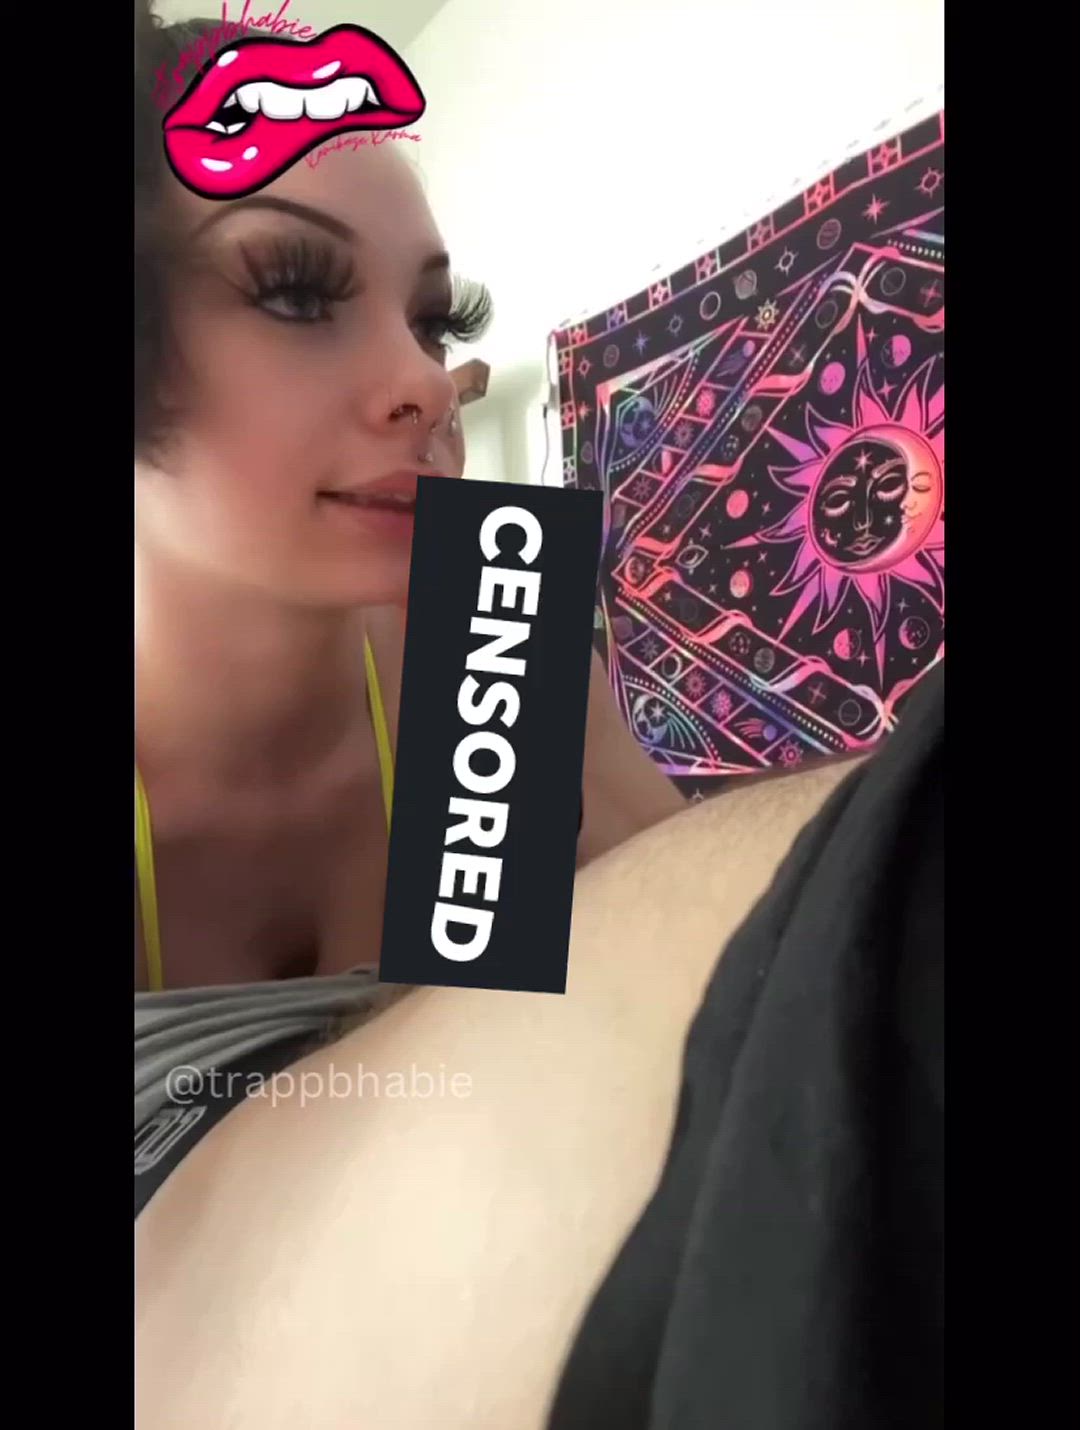 Blowjob porn video with onlyfans model Kamikaze Karma <strong>@trappbhabie</strong>